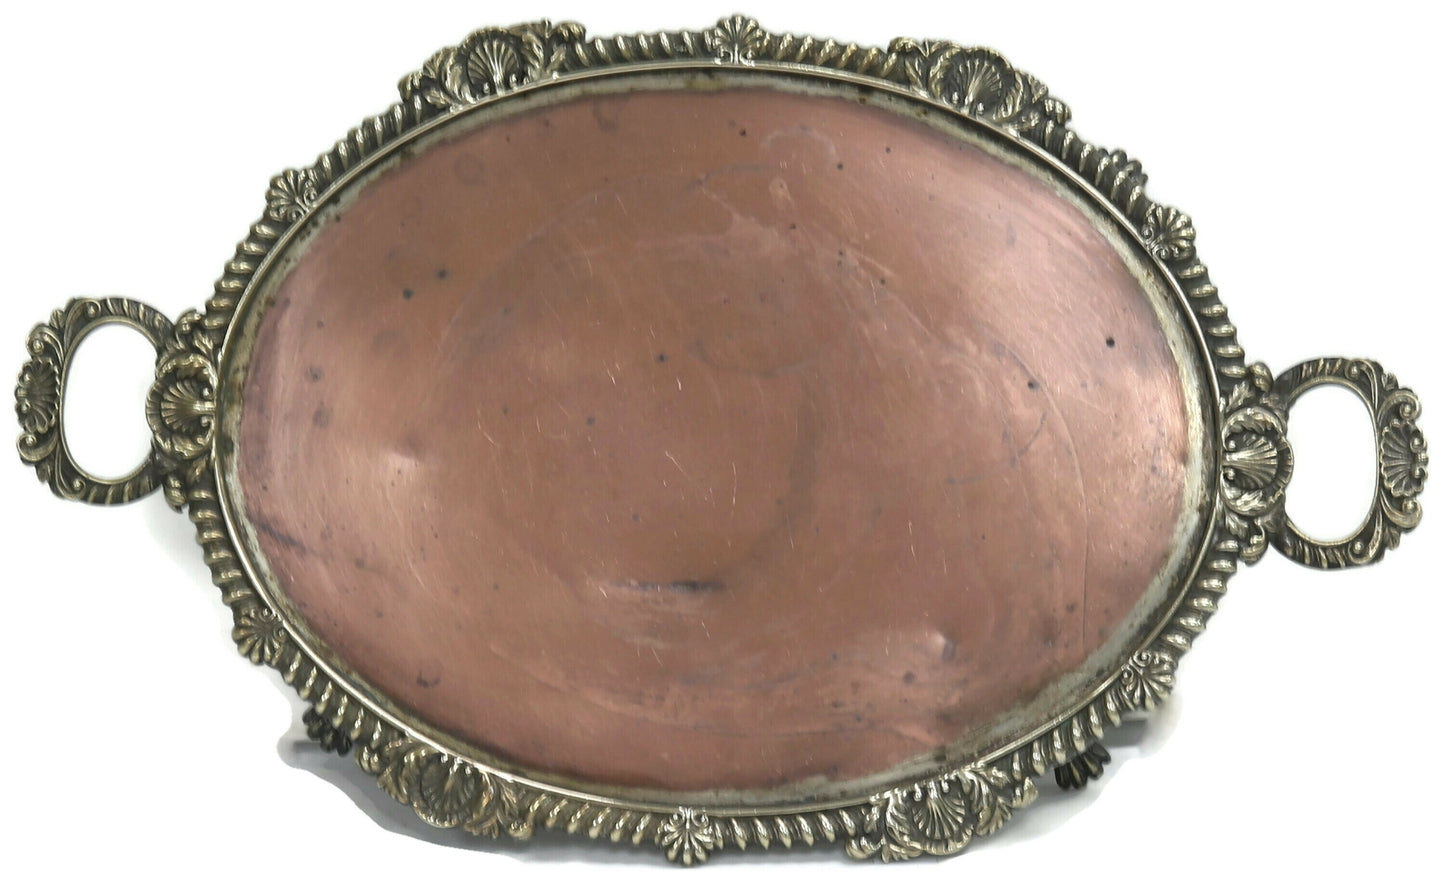 Antique Sheffield Plate Footed Tray